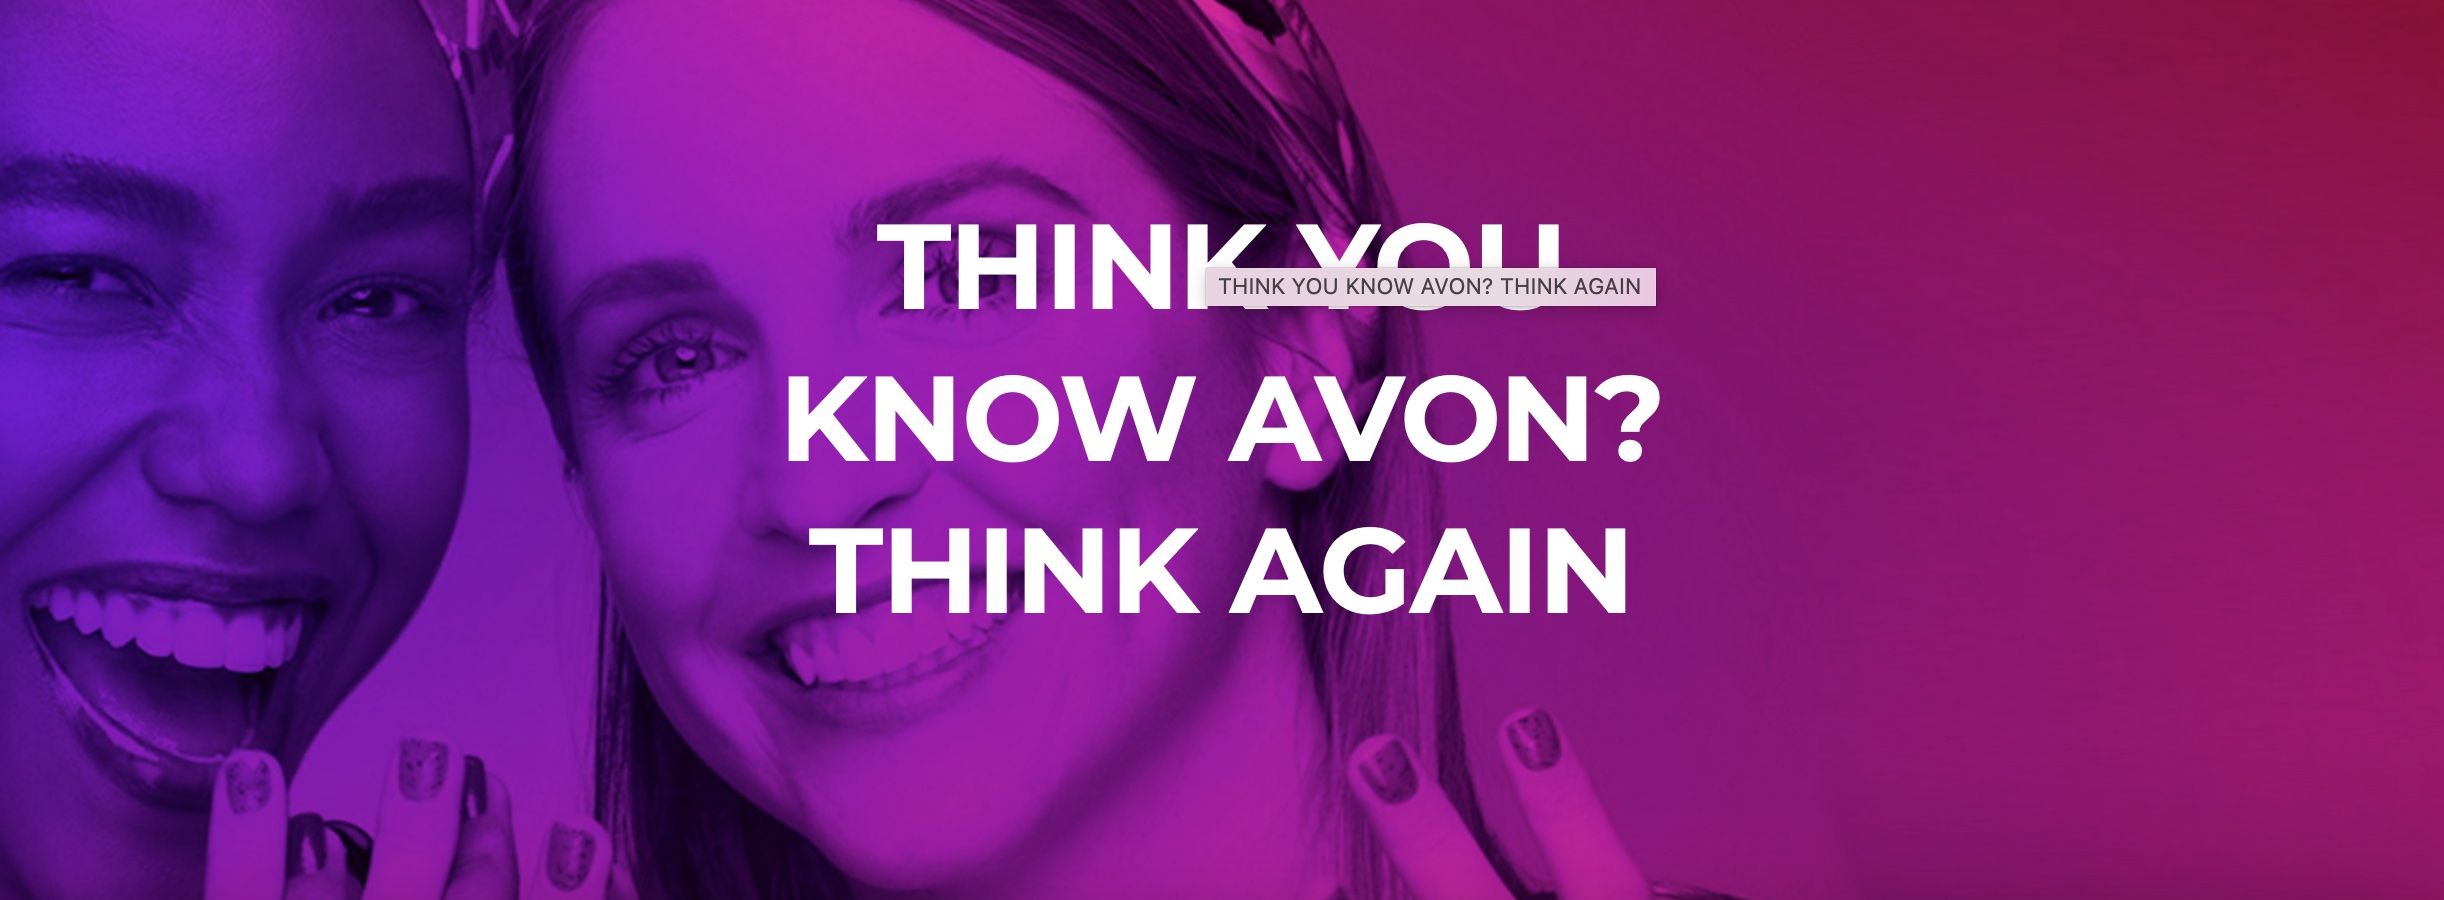 think you know avon